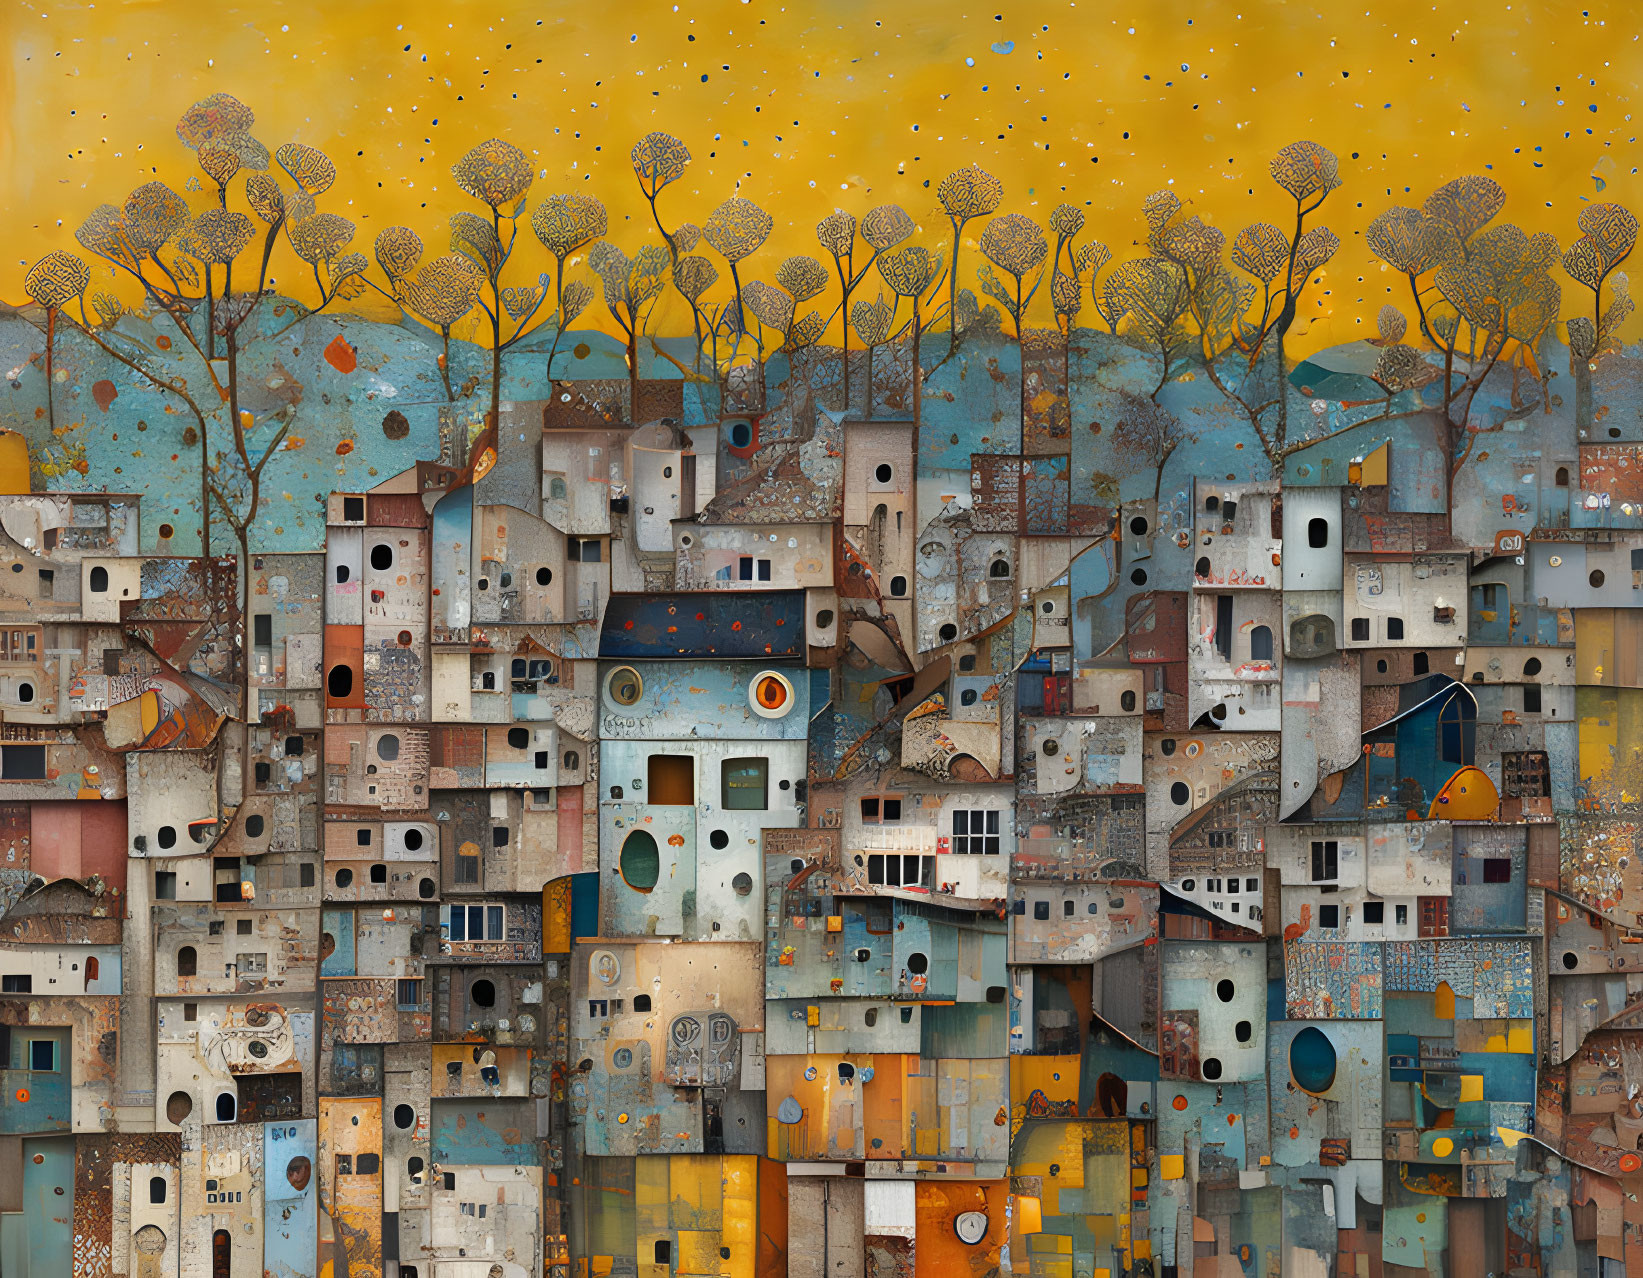 Colorful painting of whimsical village under star-speckled sky